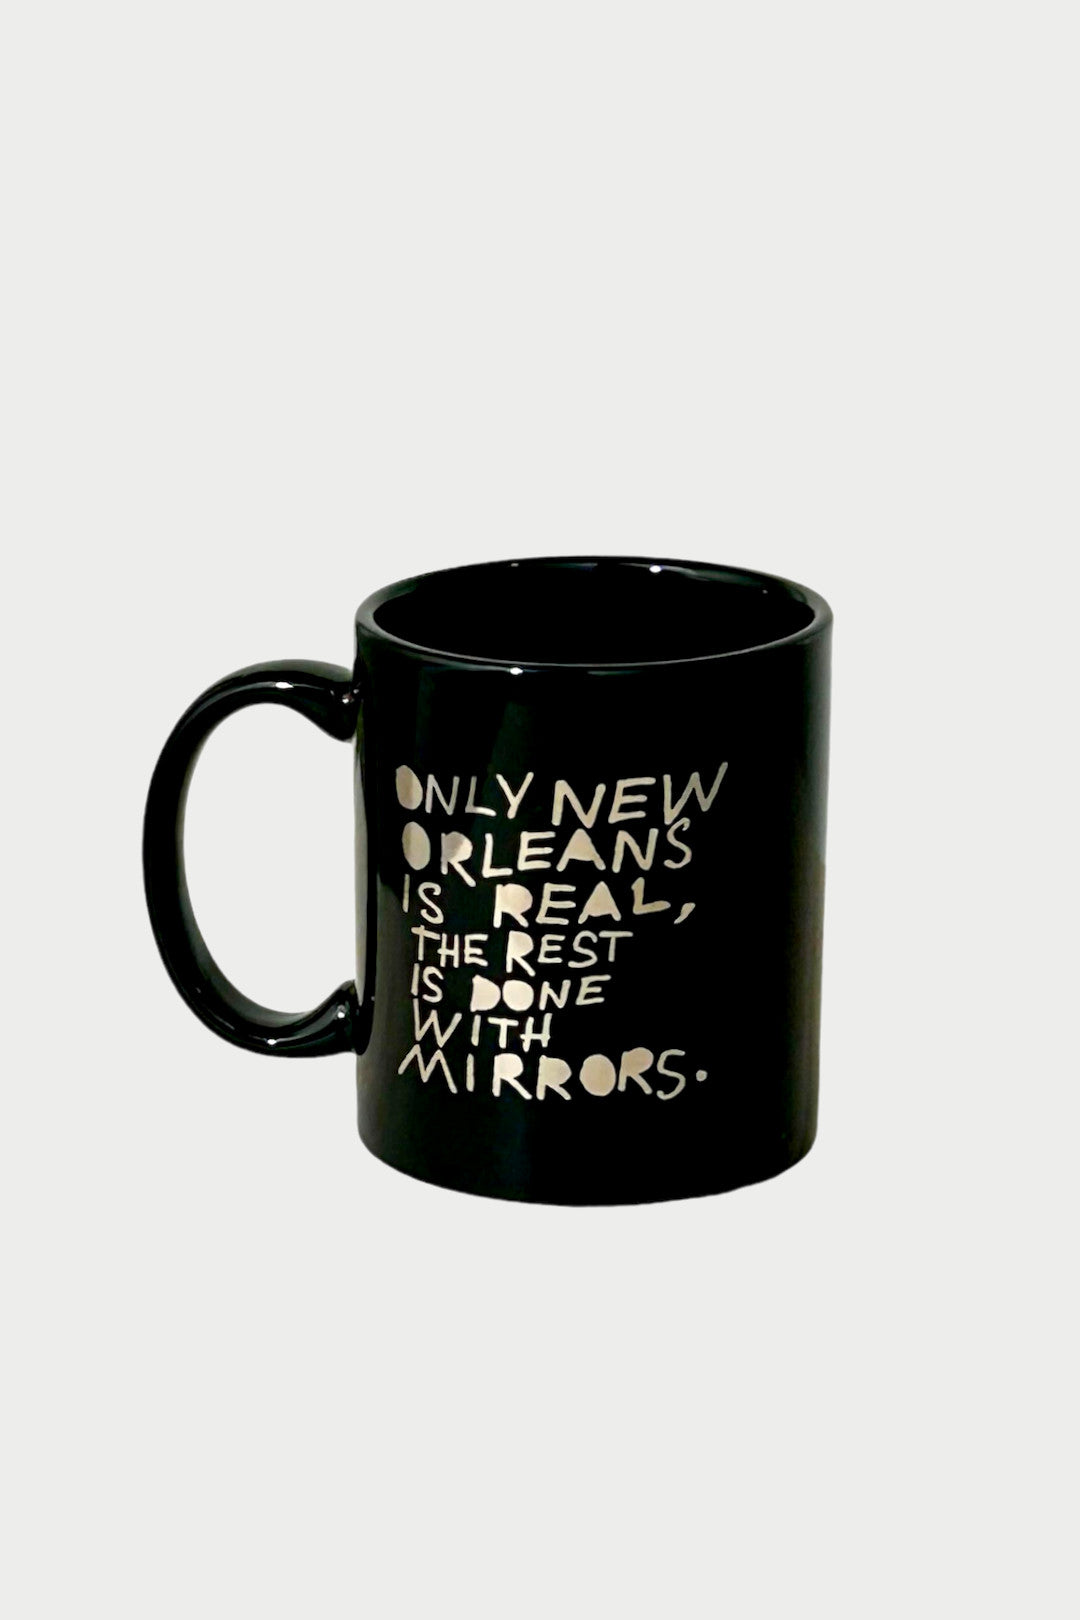 Only New Orleans is Real Mug